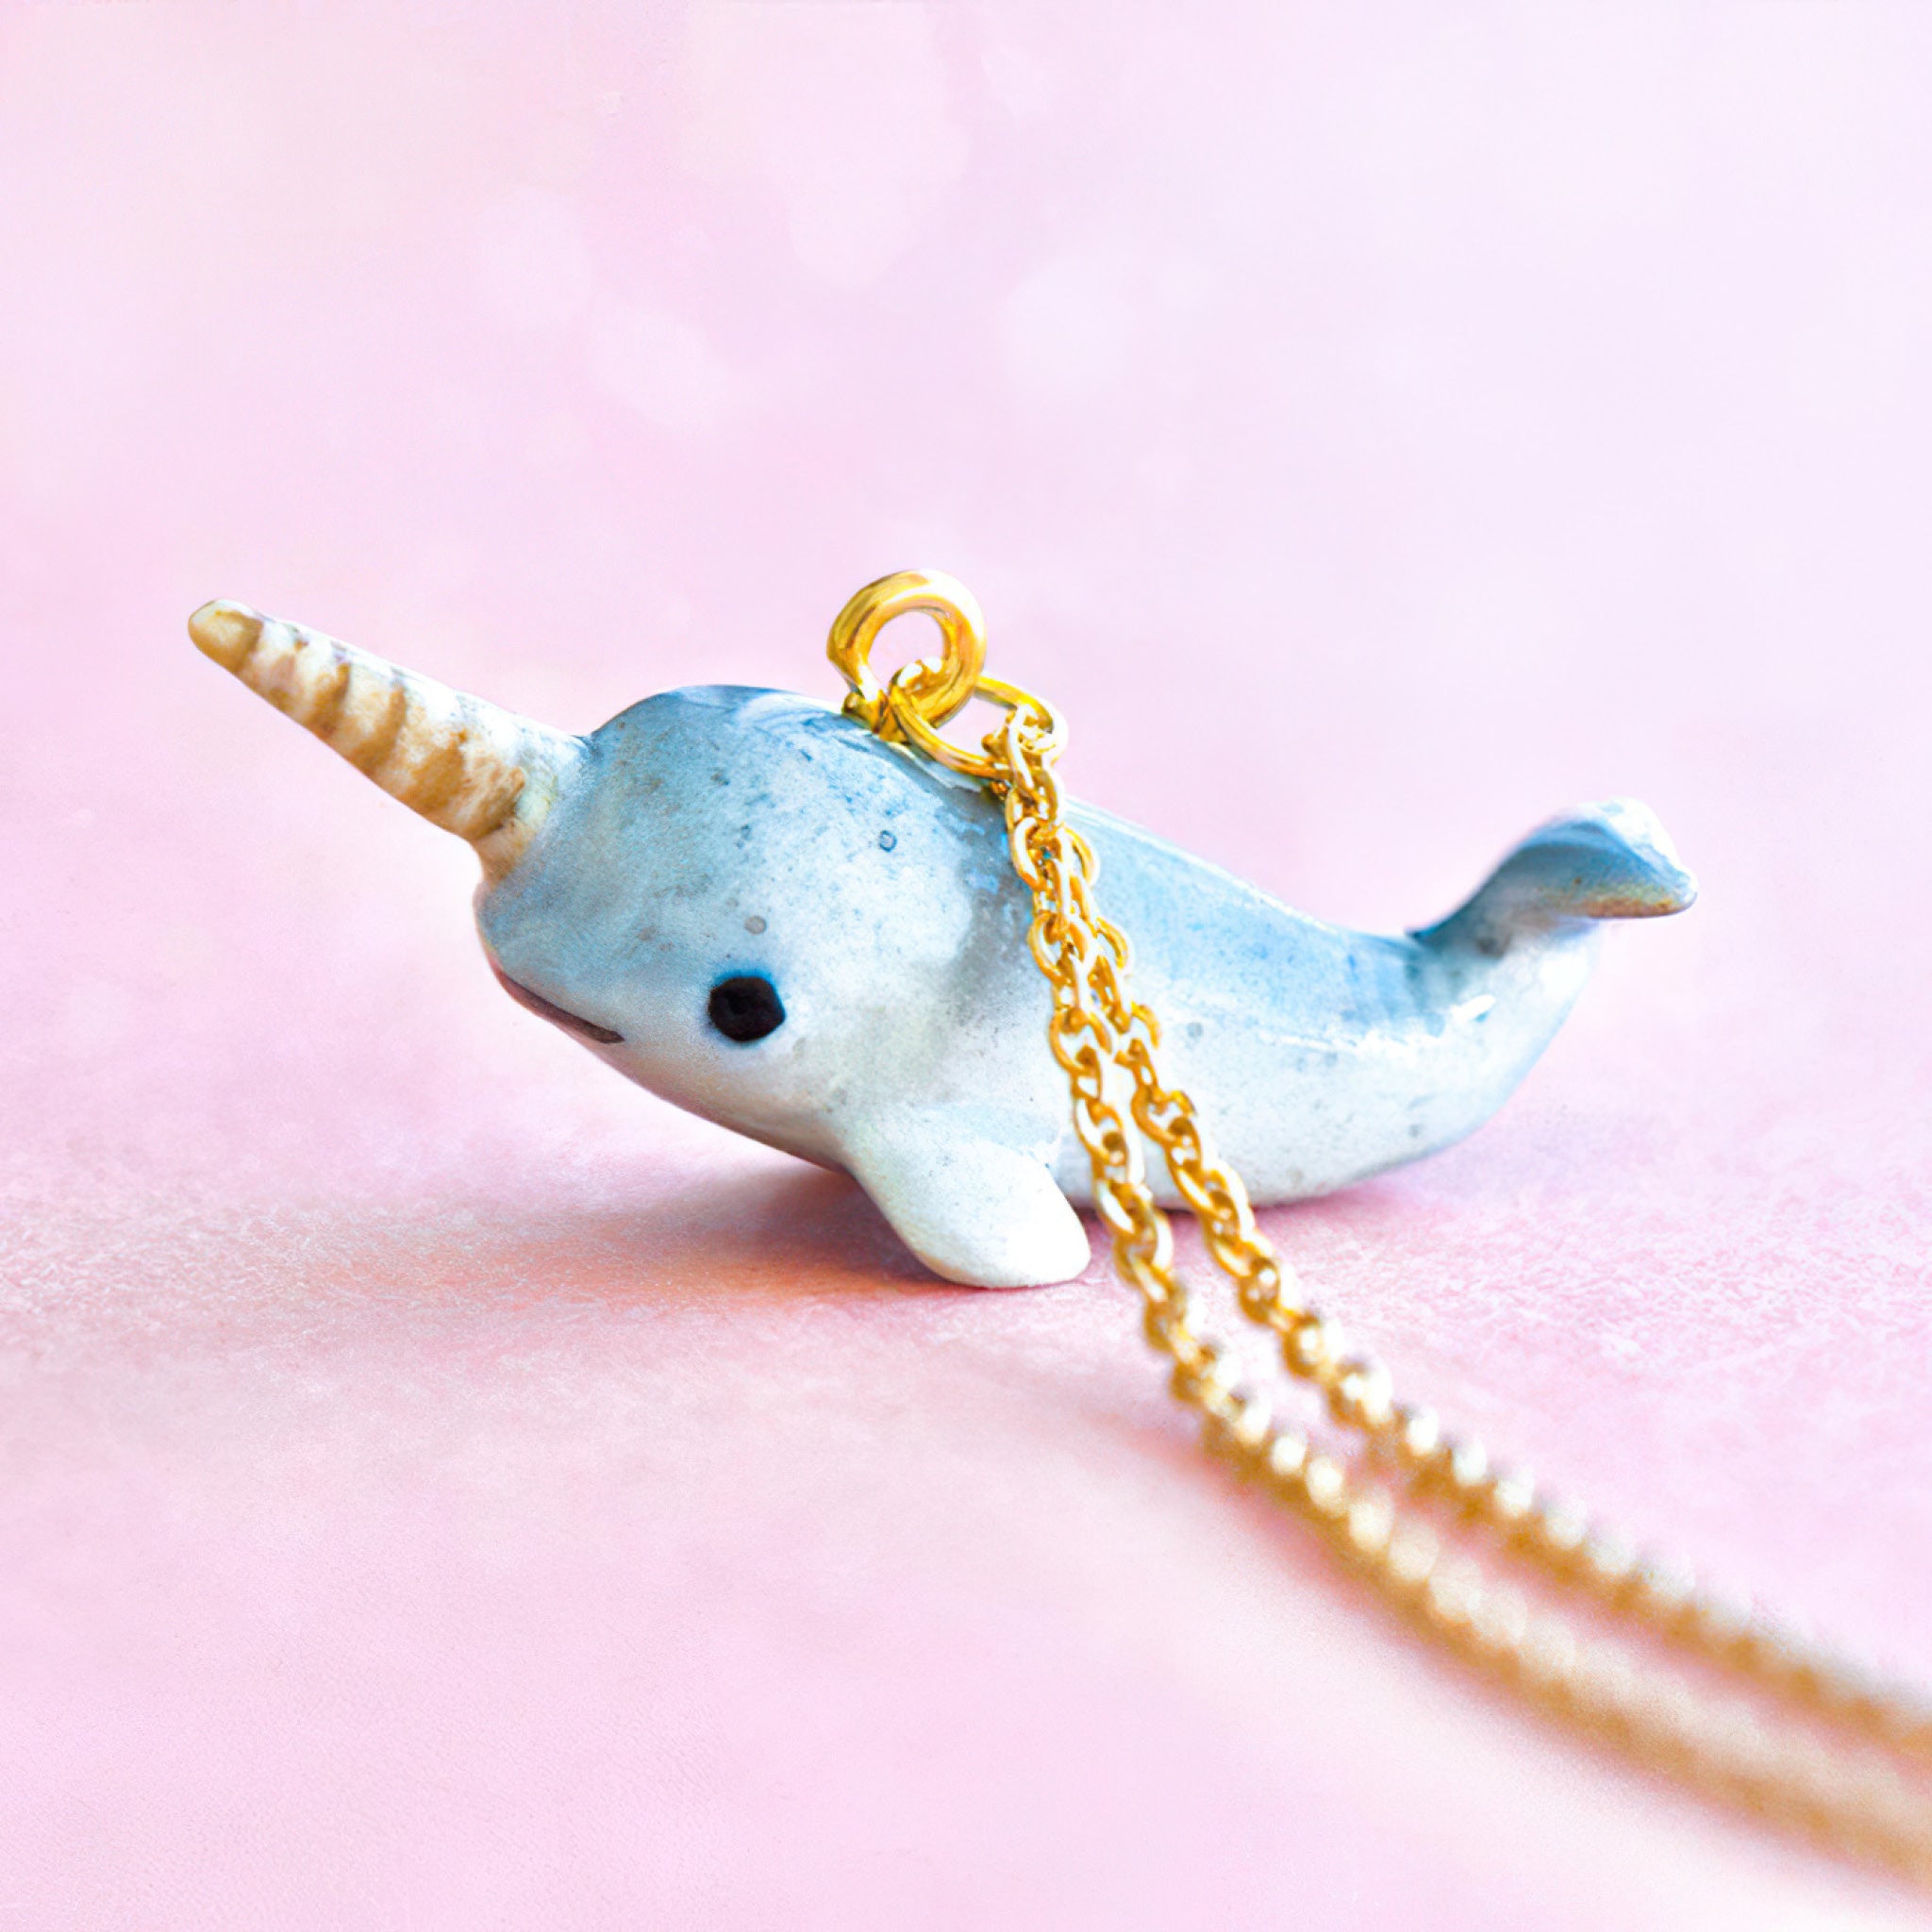 Narwhal Necklace | Camp Hollow Ceramic Animal Jewelry